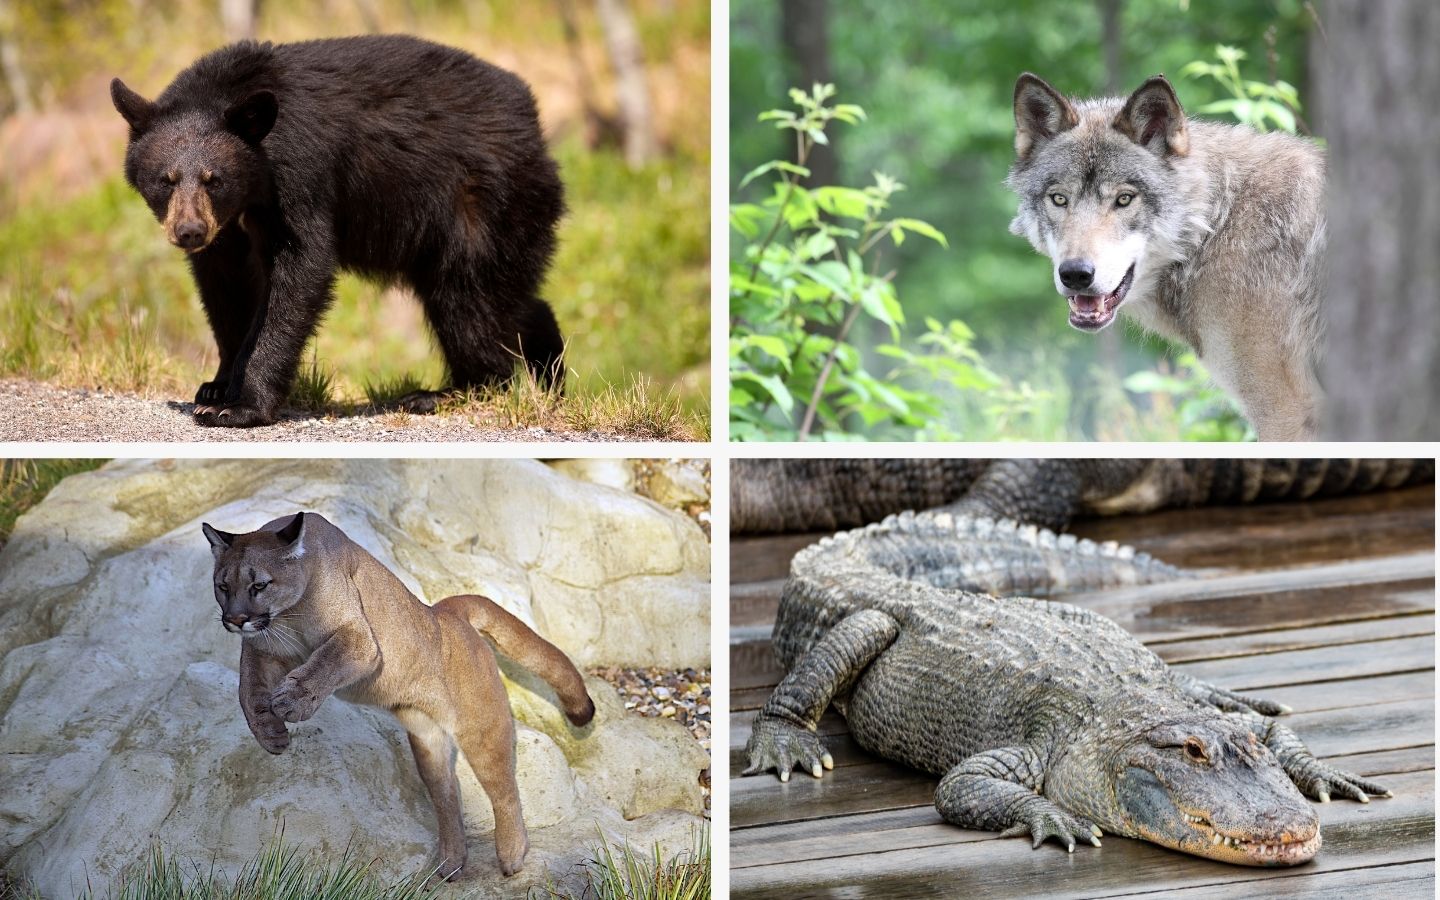 4 animal pictures: a bear, a wolf, an alligator, and a big cat.